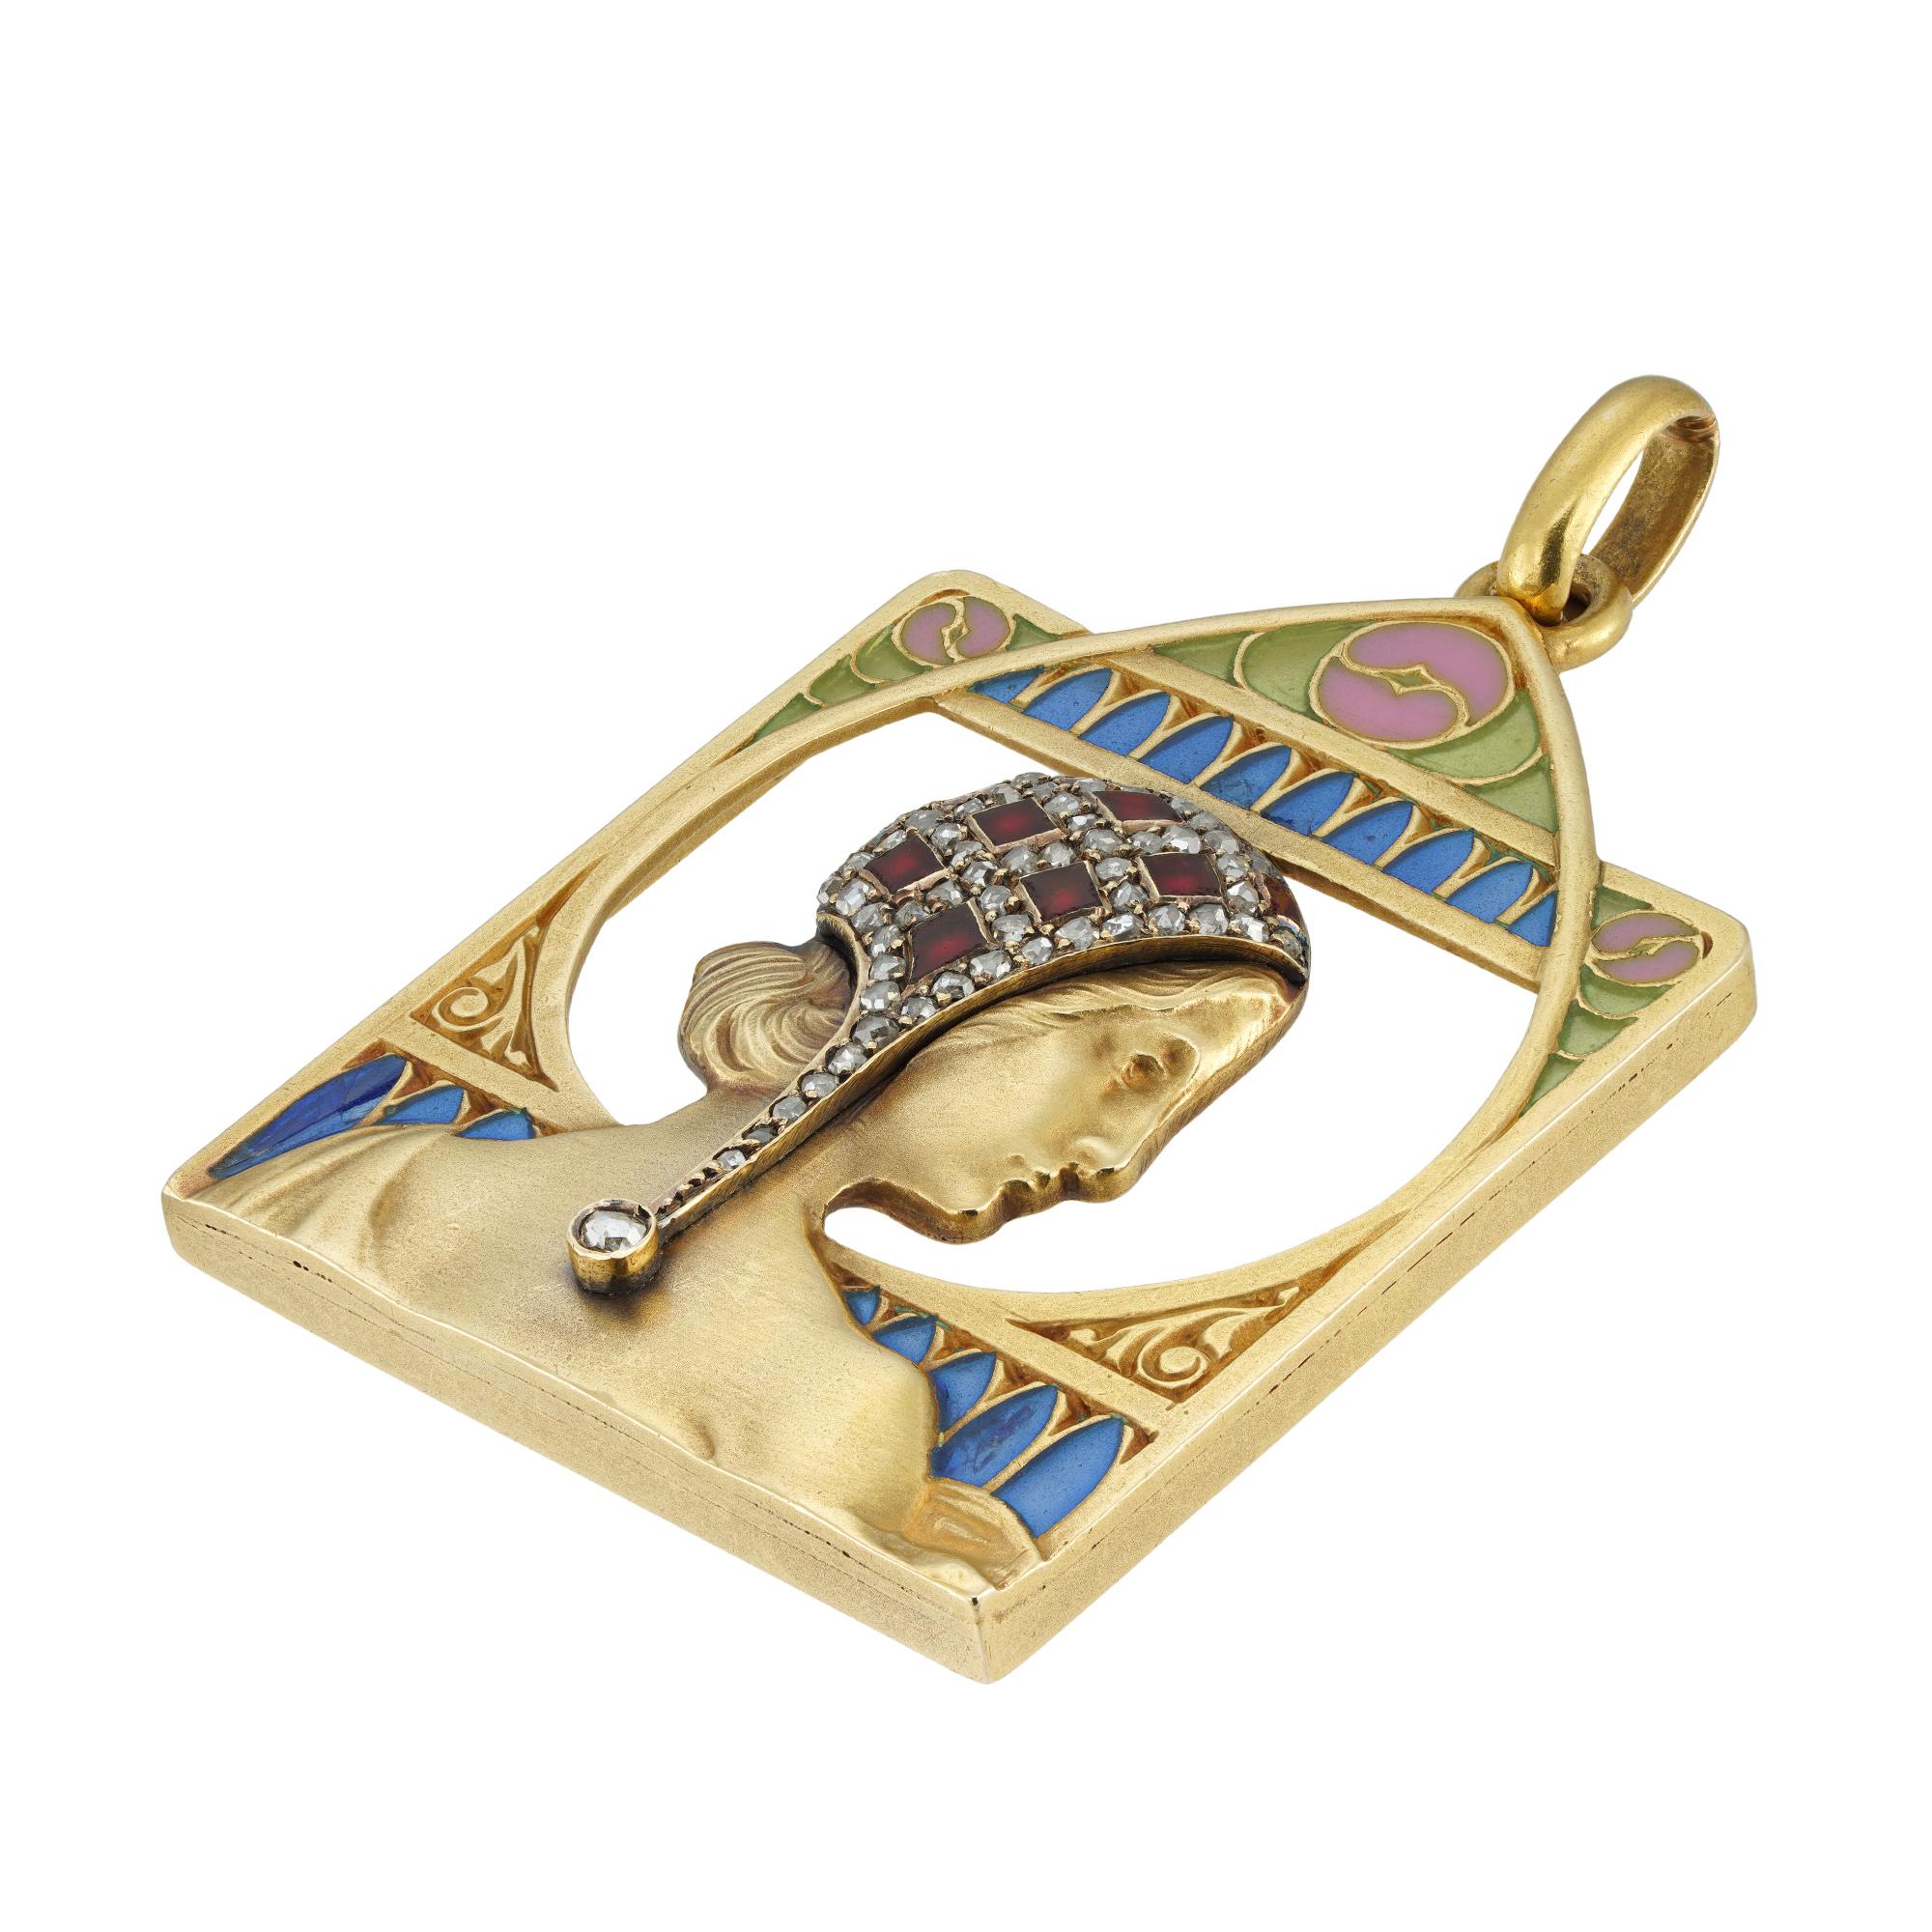 An Art Nouveau enamel, diamond and gold pendant by Masriera, depicting a lady in profile wearing a red enamelled headpiece embellished with rose-cut diamond-set decorations, to an openwork geometric frame with blue, green and pink enamel